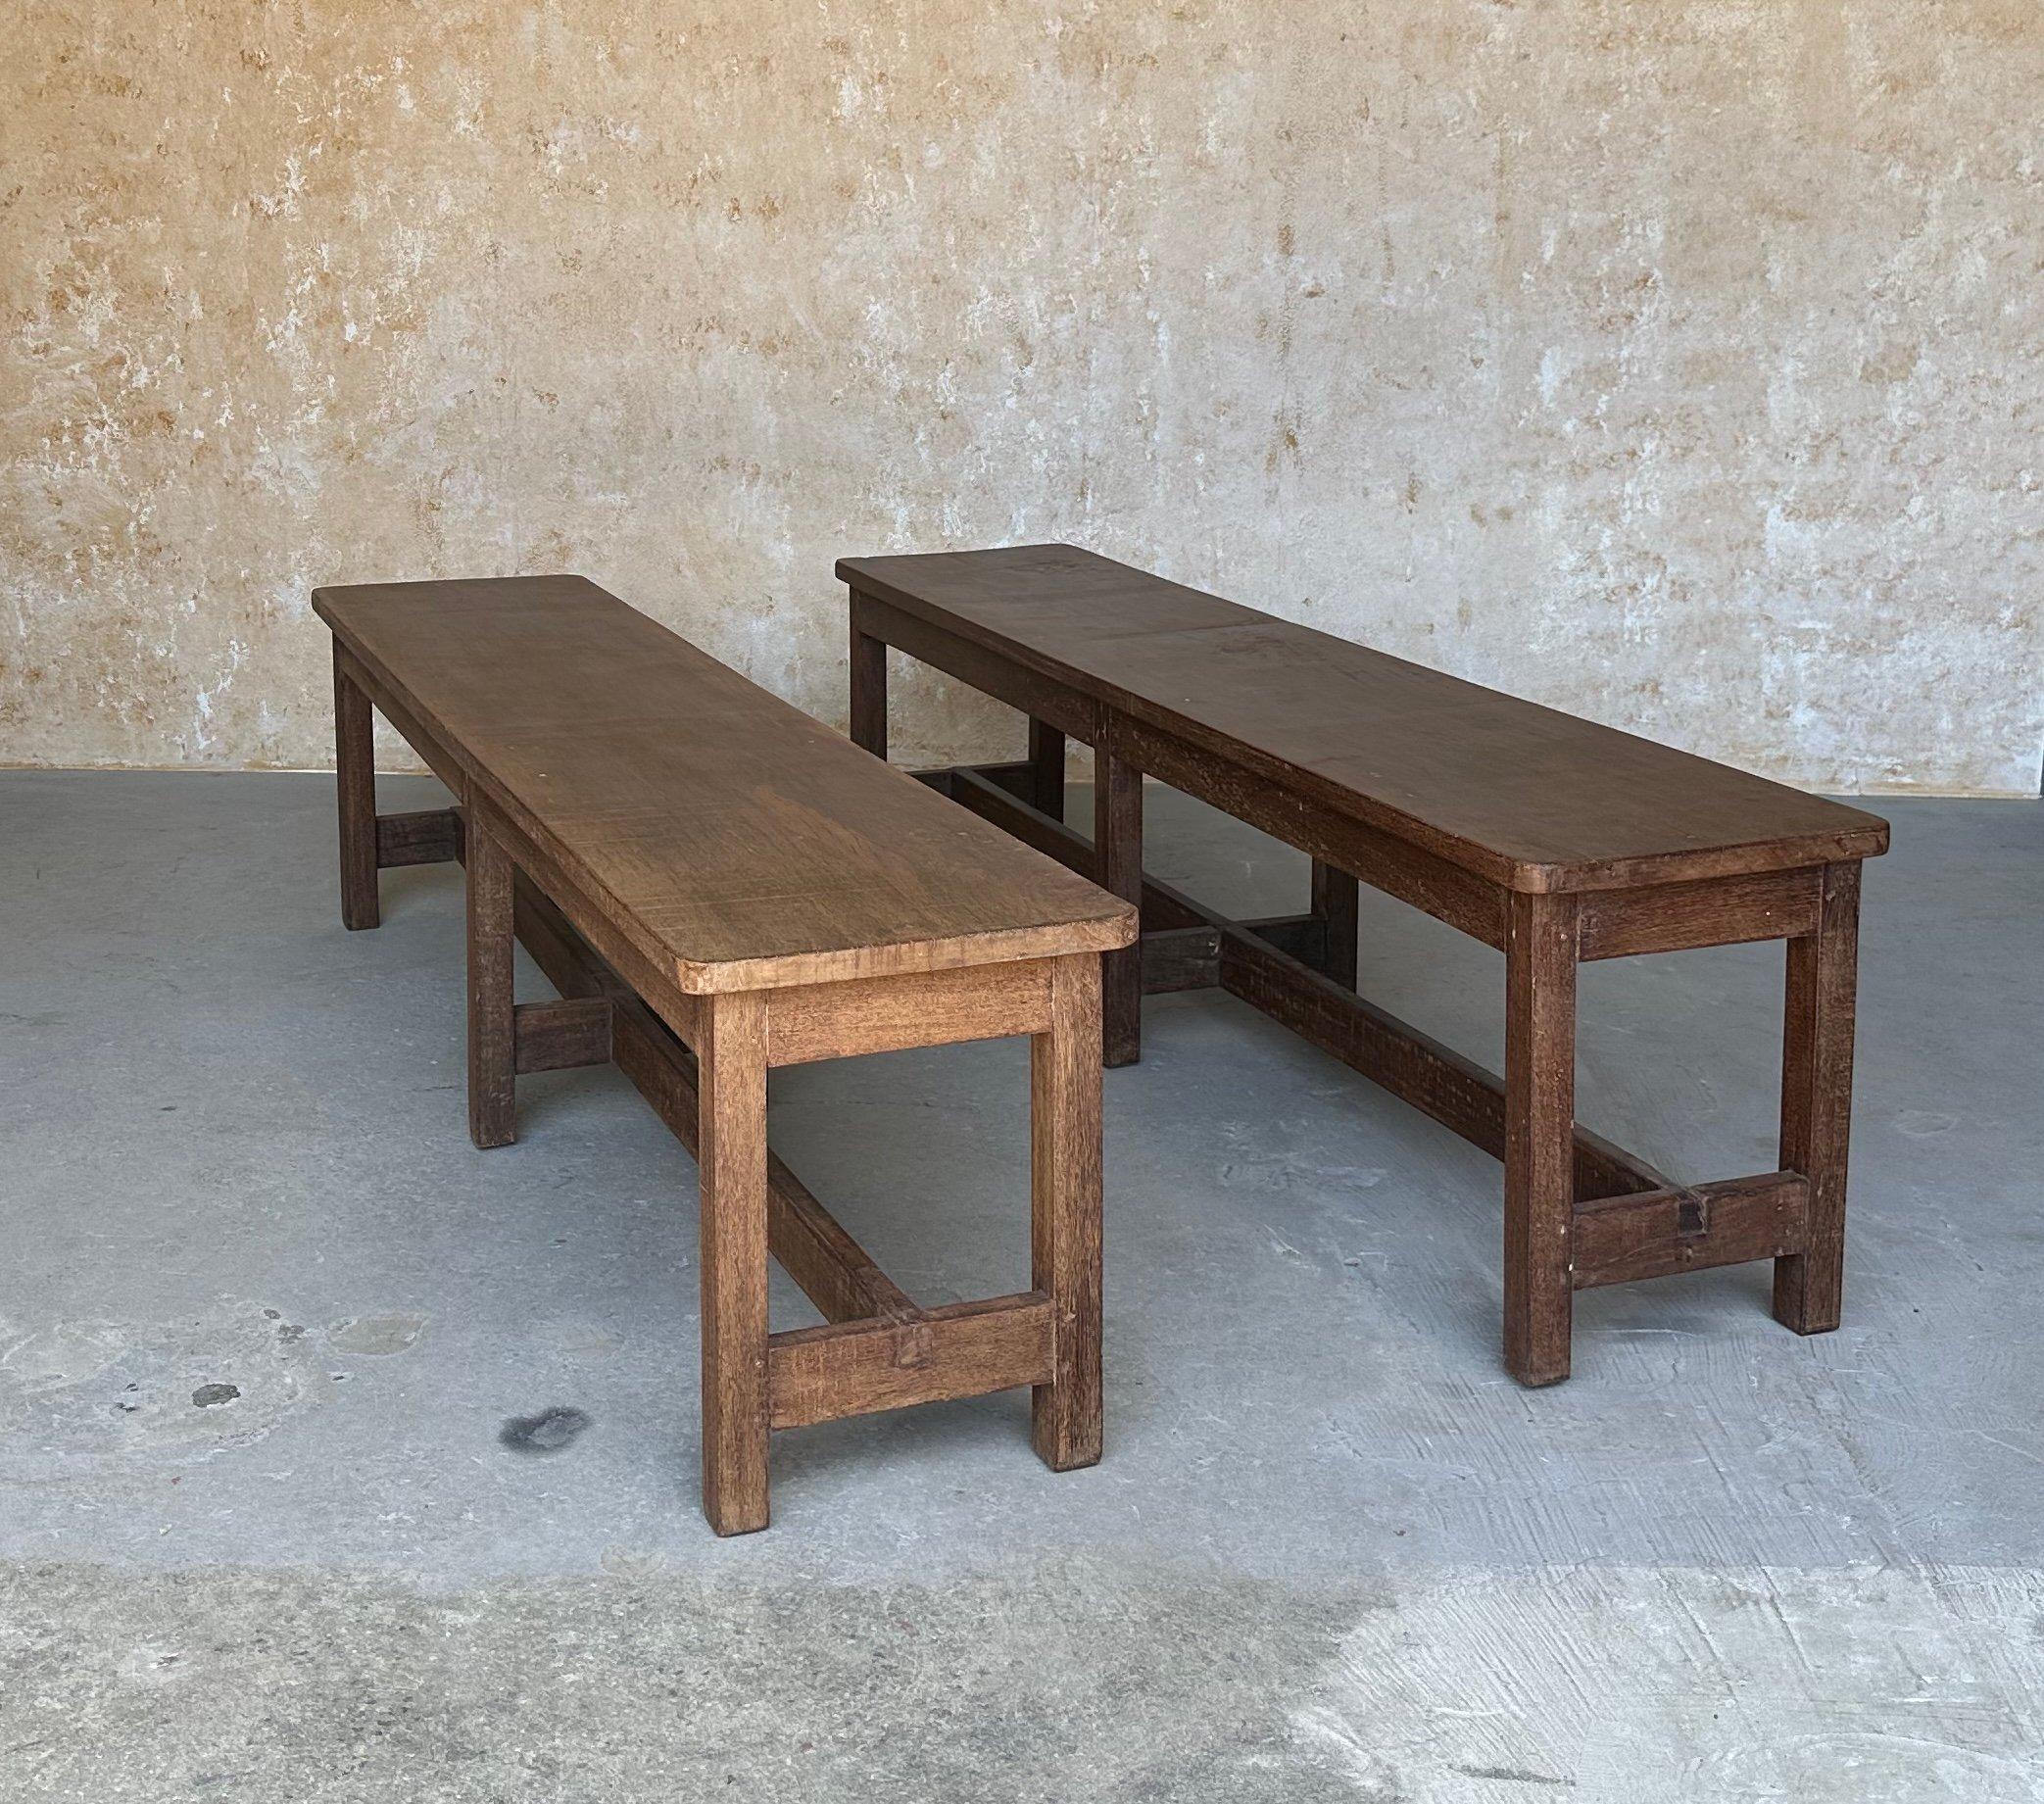 An unusual pair of large benches made of solid teak wood that feature stretchers supported by a central set of legs. The benches were most likely made in India at the beginning of the 20th century and have a wonderful patina that shows signs of wear